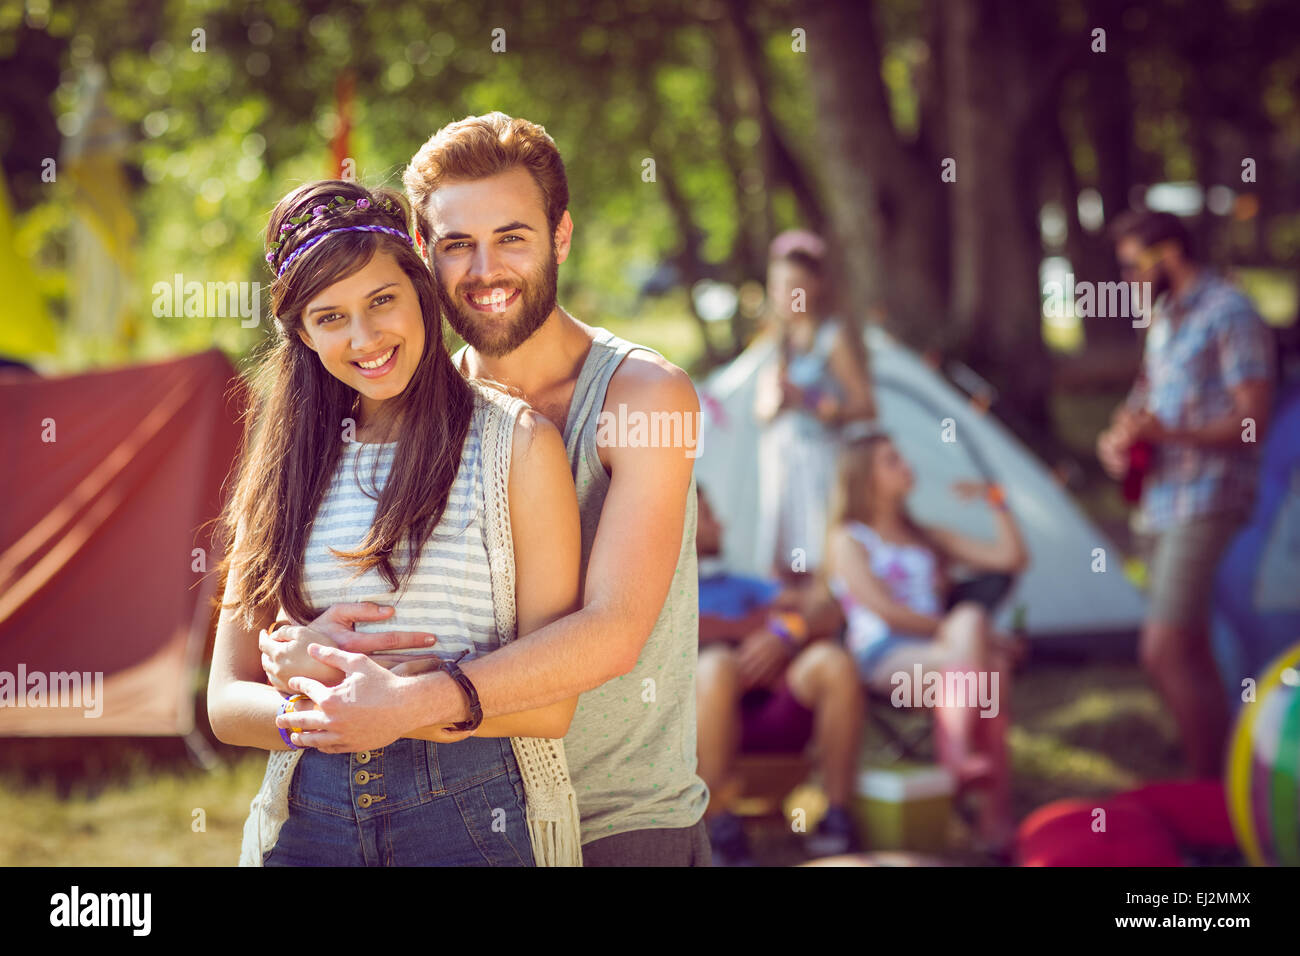 Hipster couple smiling at camera Banque D'Images